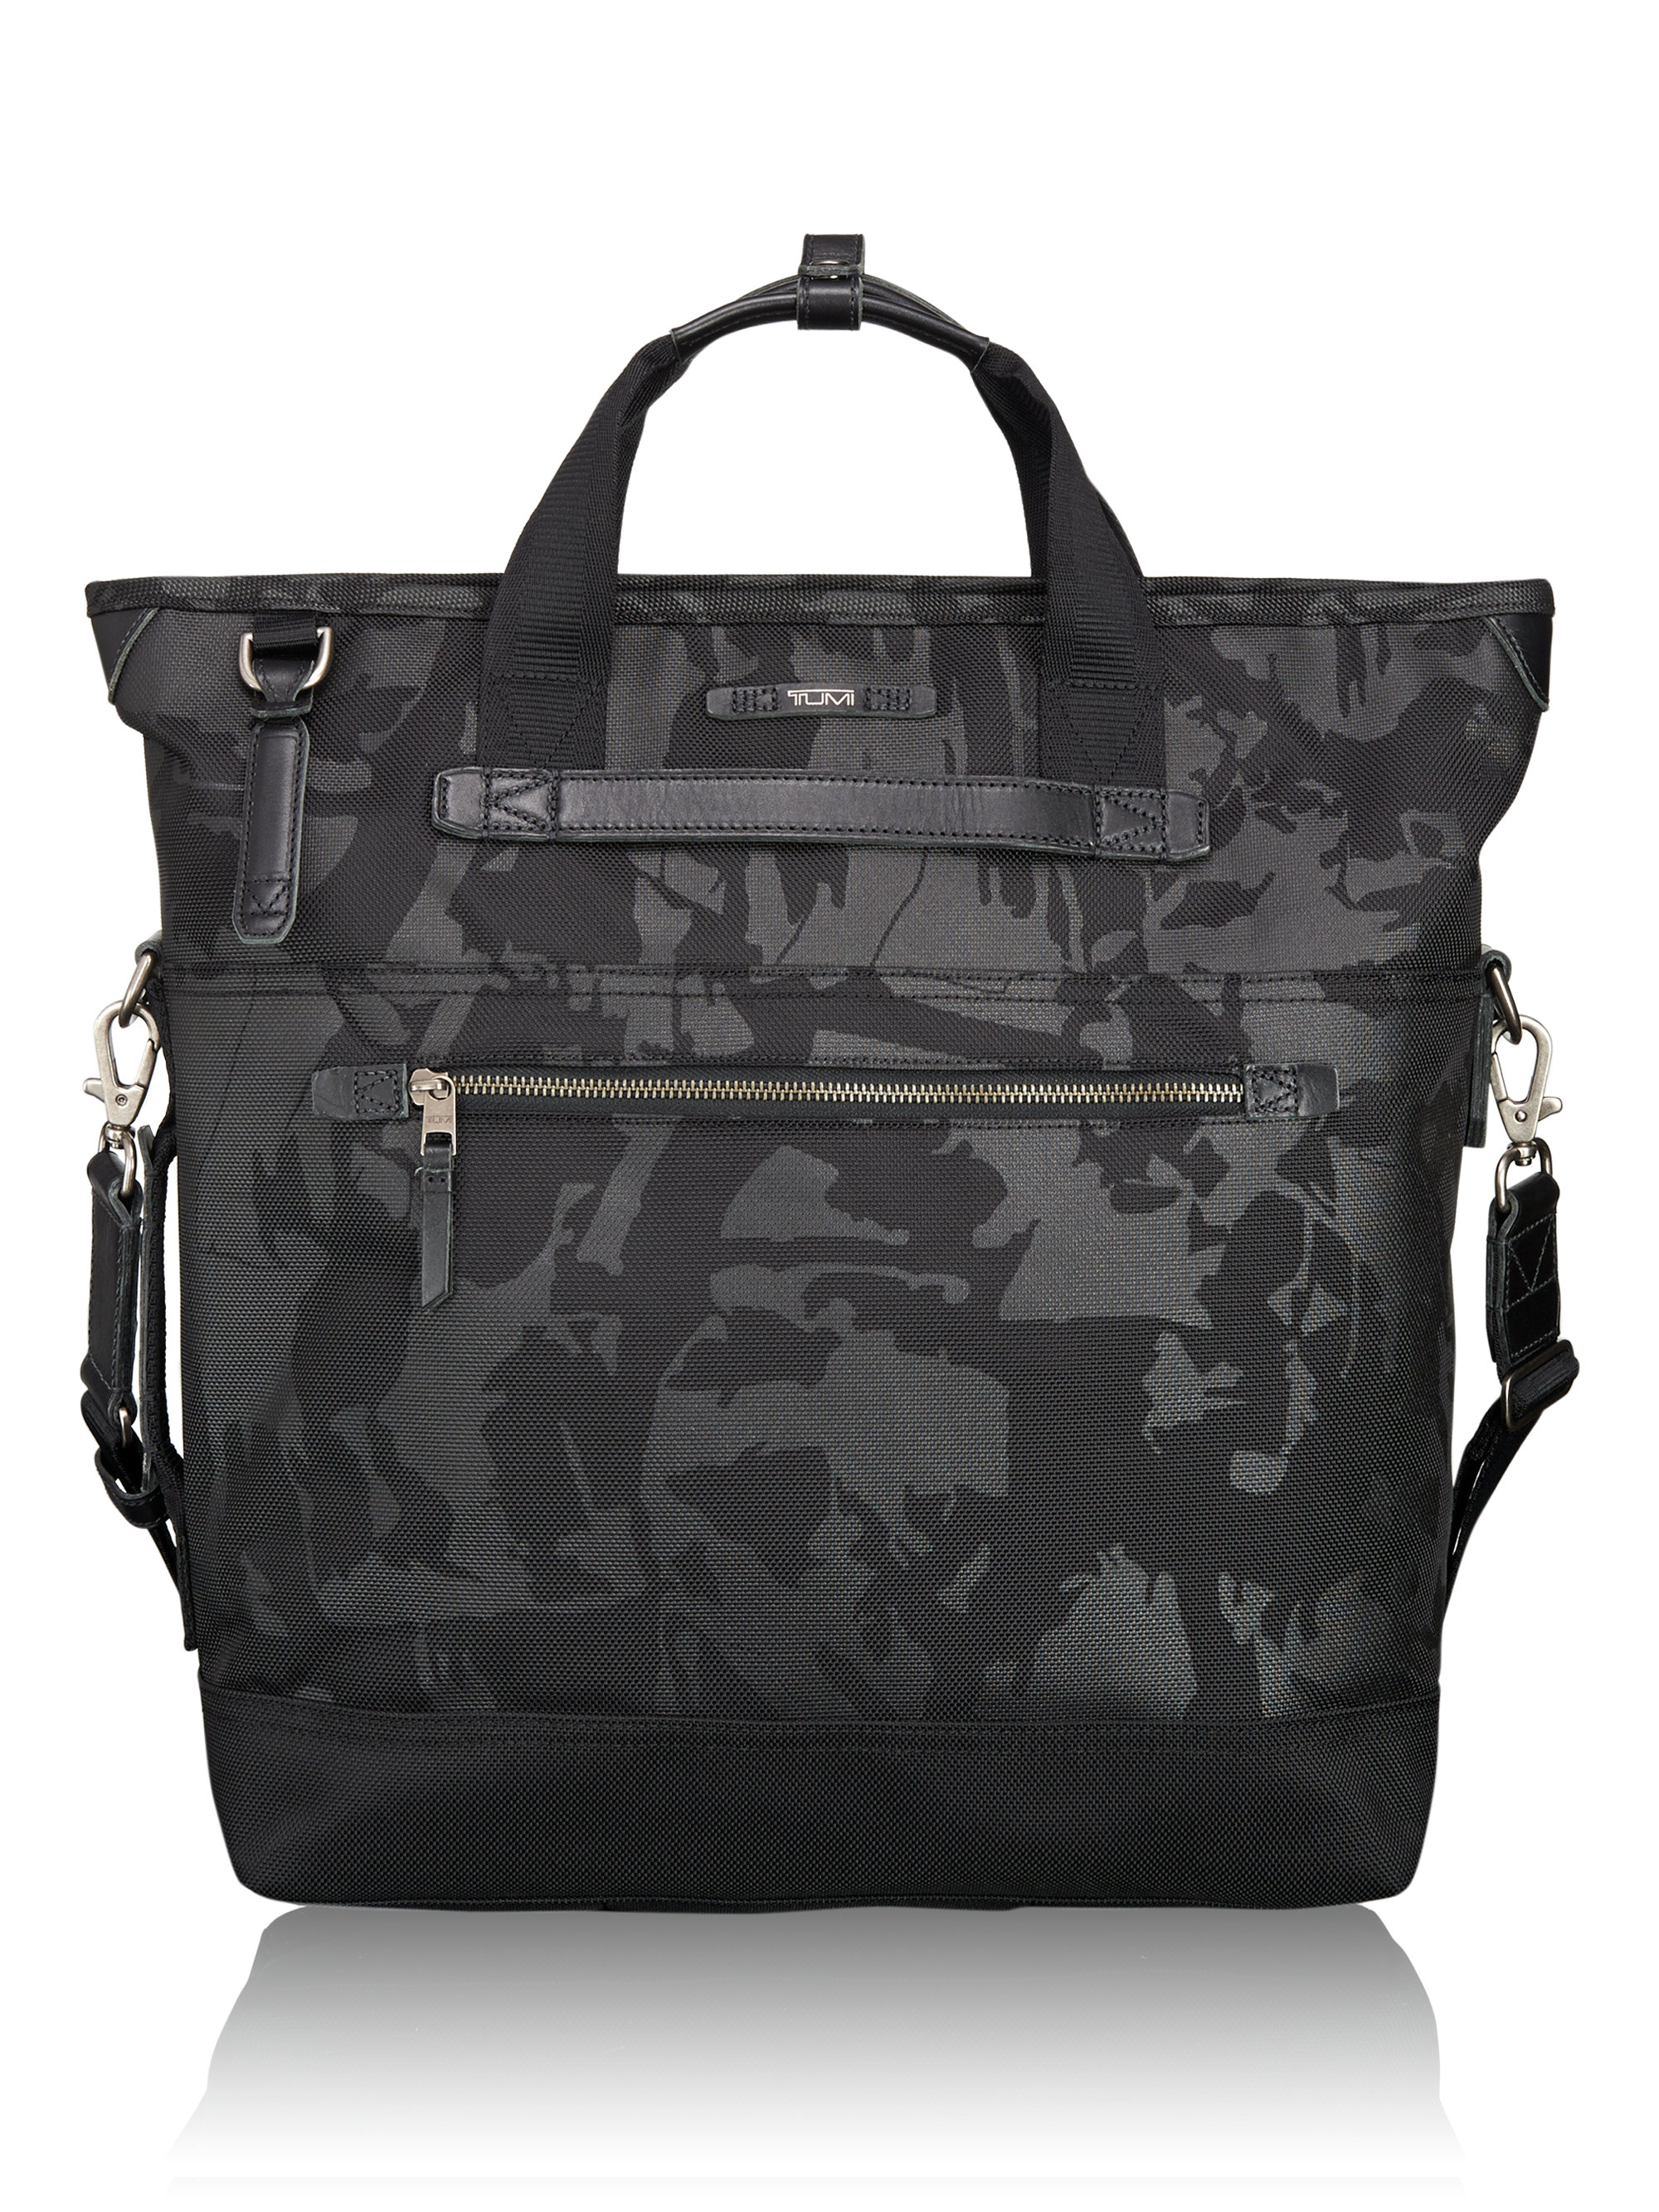 Tumi Dalston Perch Leather-trimmed Backpack in Black for Men - Lyst